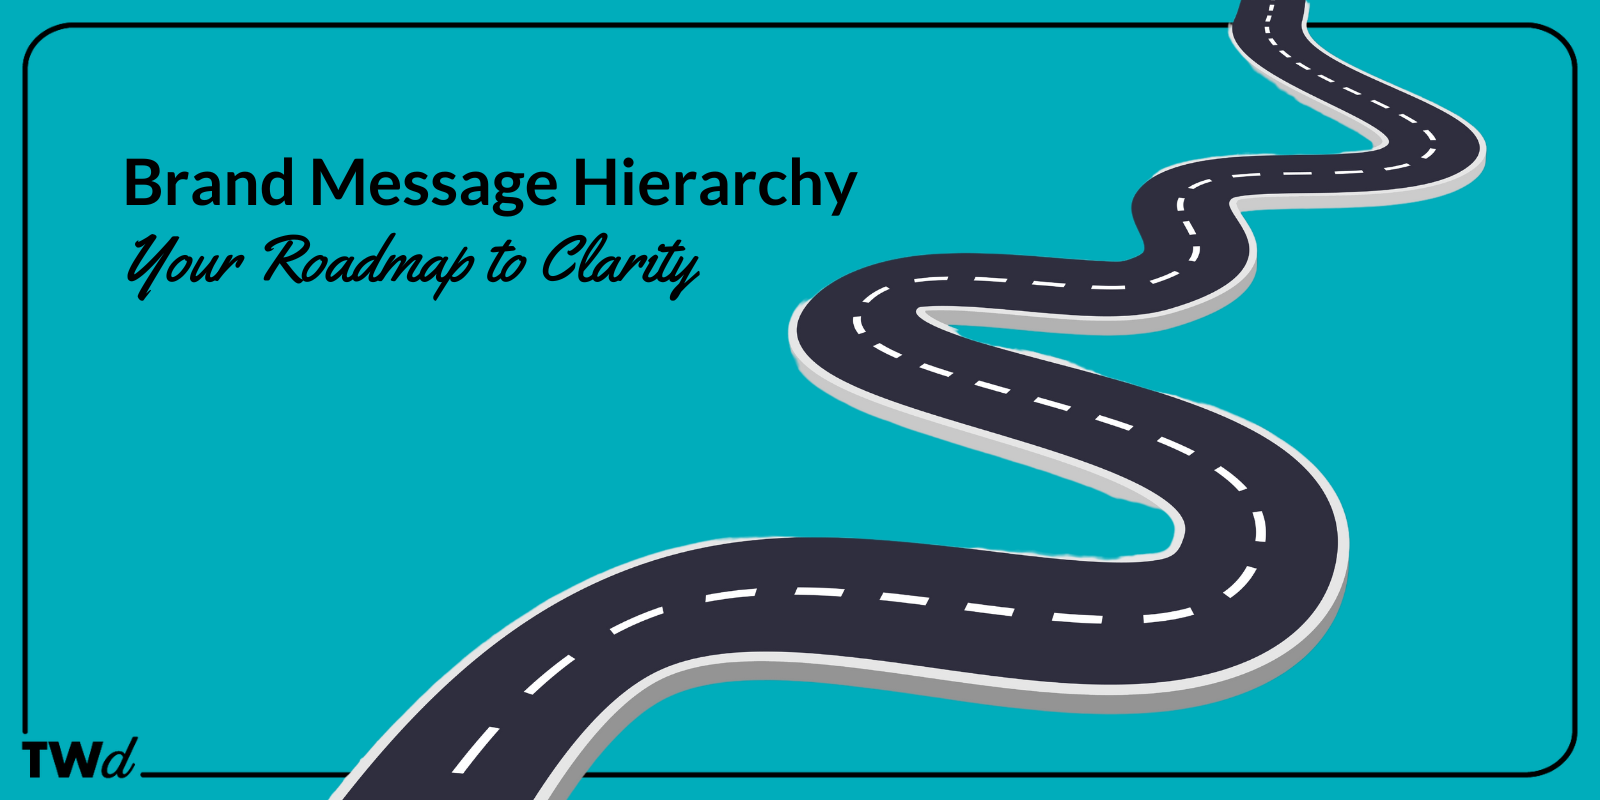 Brand Message Hierarchy 101